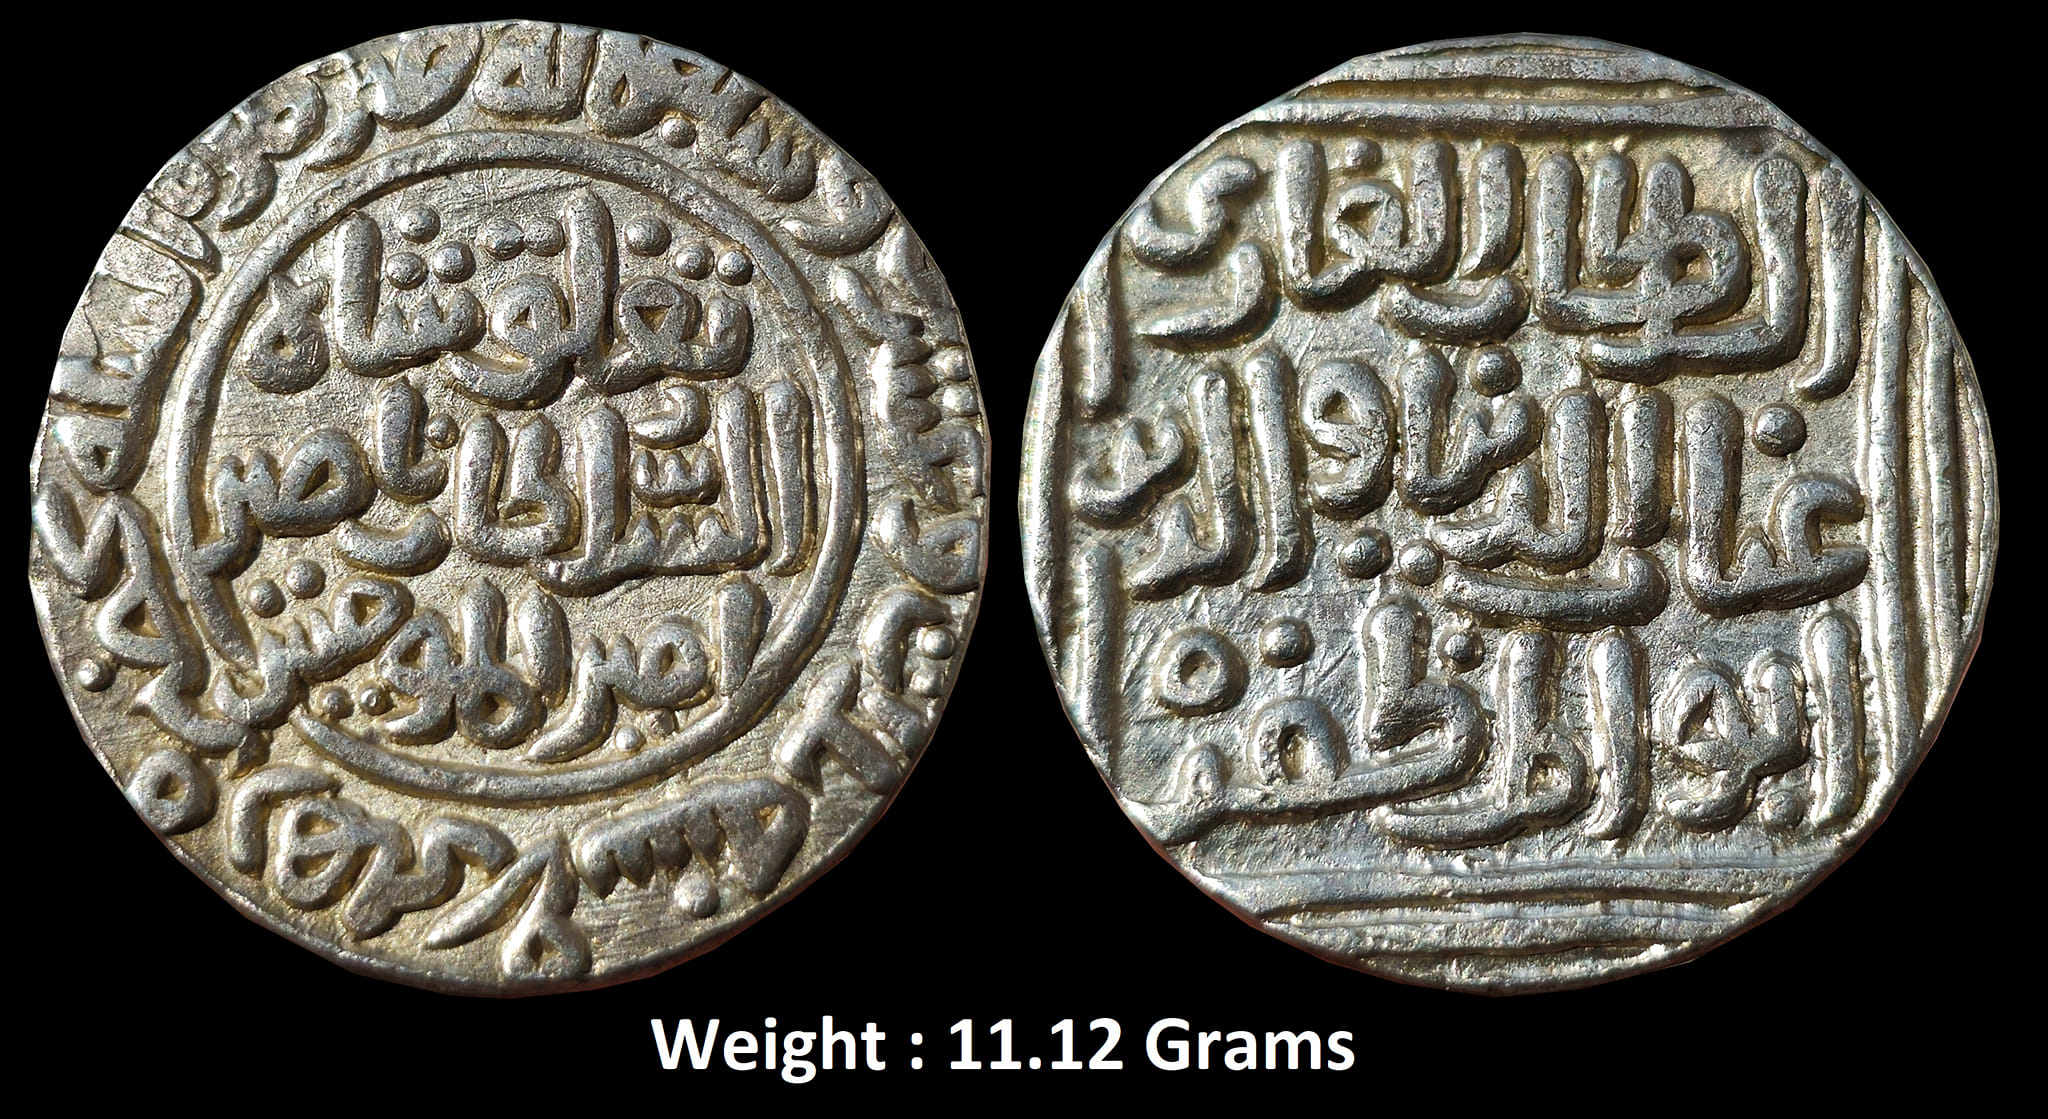 Delhi Sultan, Ghiyath Al-Din Tughluq Shah (AH 720-725, 1320-1325 AD), Full Die Silver Tanka,
Hadrat Delhi Mint (fully visible at 7 o'clock in outer margin on rev),
Note : Tughluq struck silver tankas at Dar al-Islam, Delhi and Deogir with the same legend, and then, after the conquest of Tilangana, tankas in the both metals with a differnt legend and the mint-name Mulk-i-Tilang, Legends, al-sultan al-ghazi legend, used at Dar al-Islam, Delhi and Deogir. Obverse : "al-sultan al-ghazi ghiyath al-dunya wa'l din'l muzaffar",
Reverse : "tugluq shah al-sultan nasir amir al-mu'minin", NW # 434-439, R # 1083, G&G # D306, very fine, Rare.
Weight : 11.12 Grams